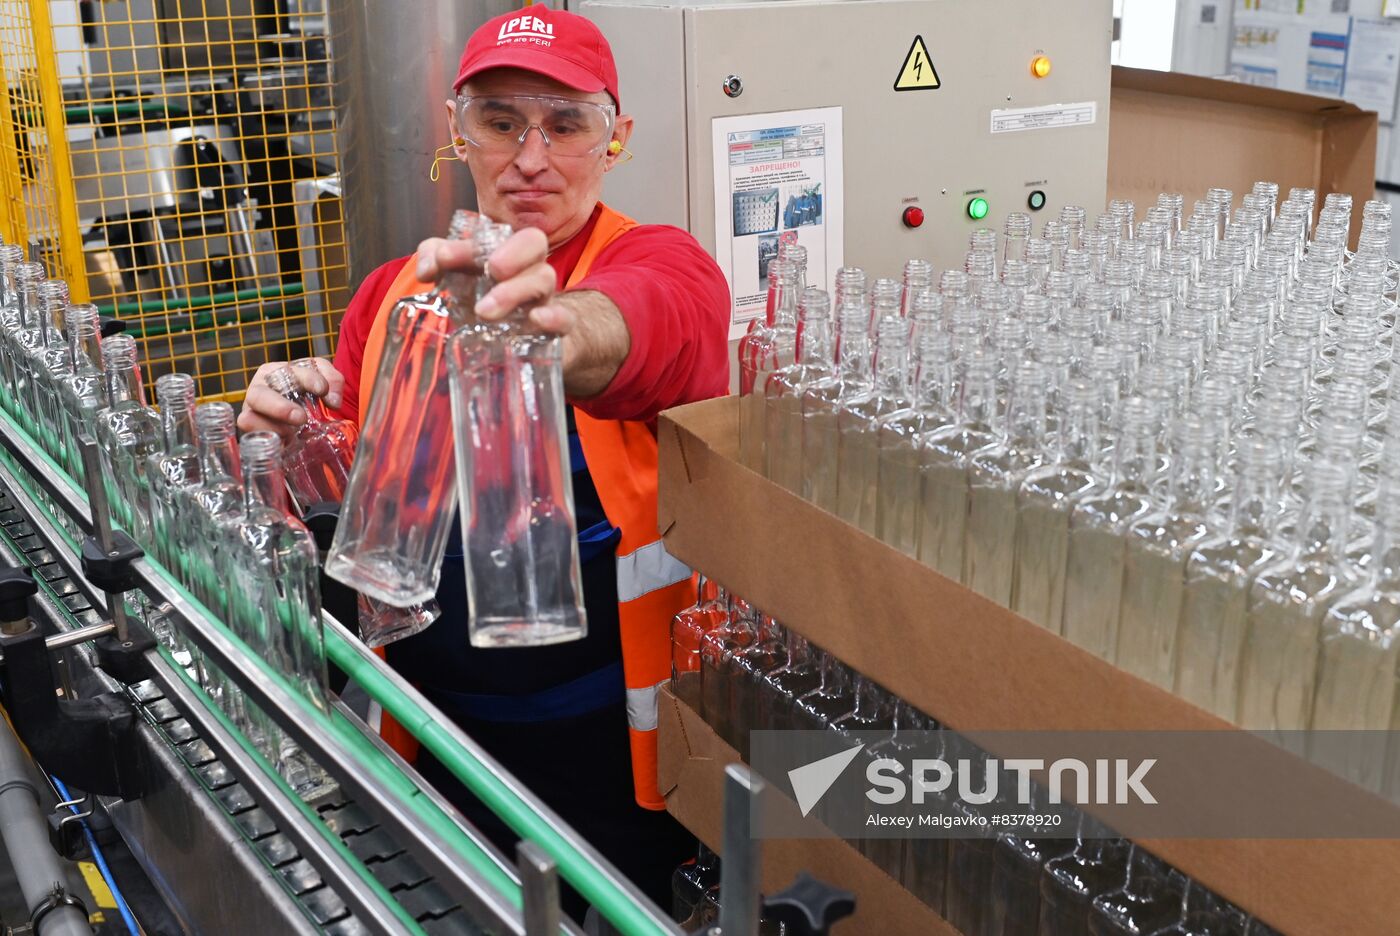 Russia Alcoholic Beverage Industry